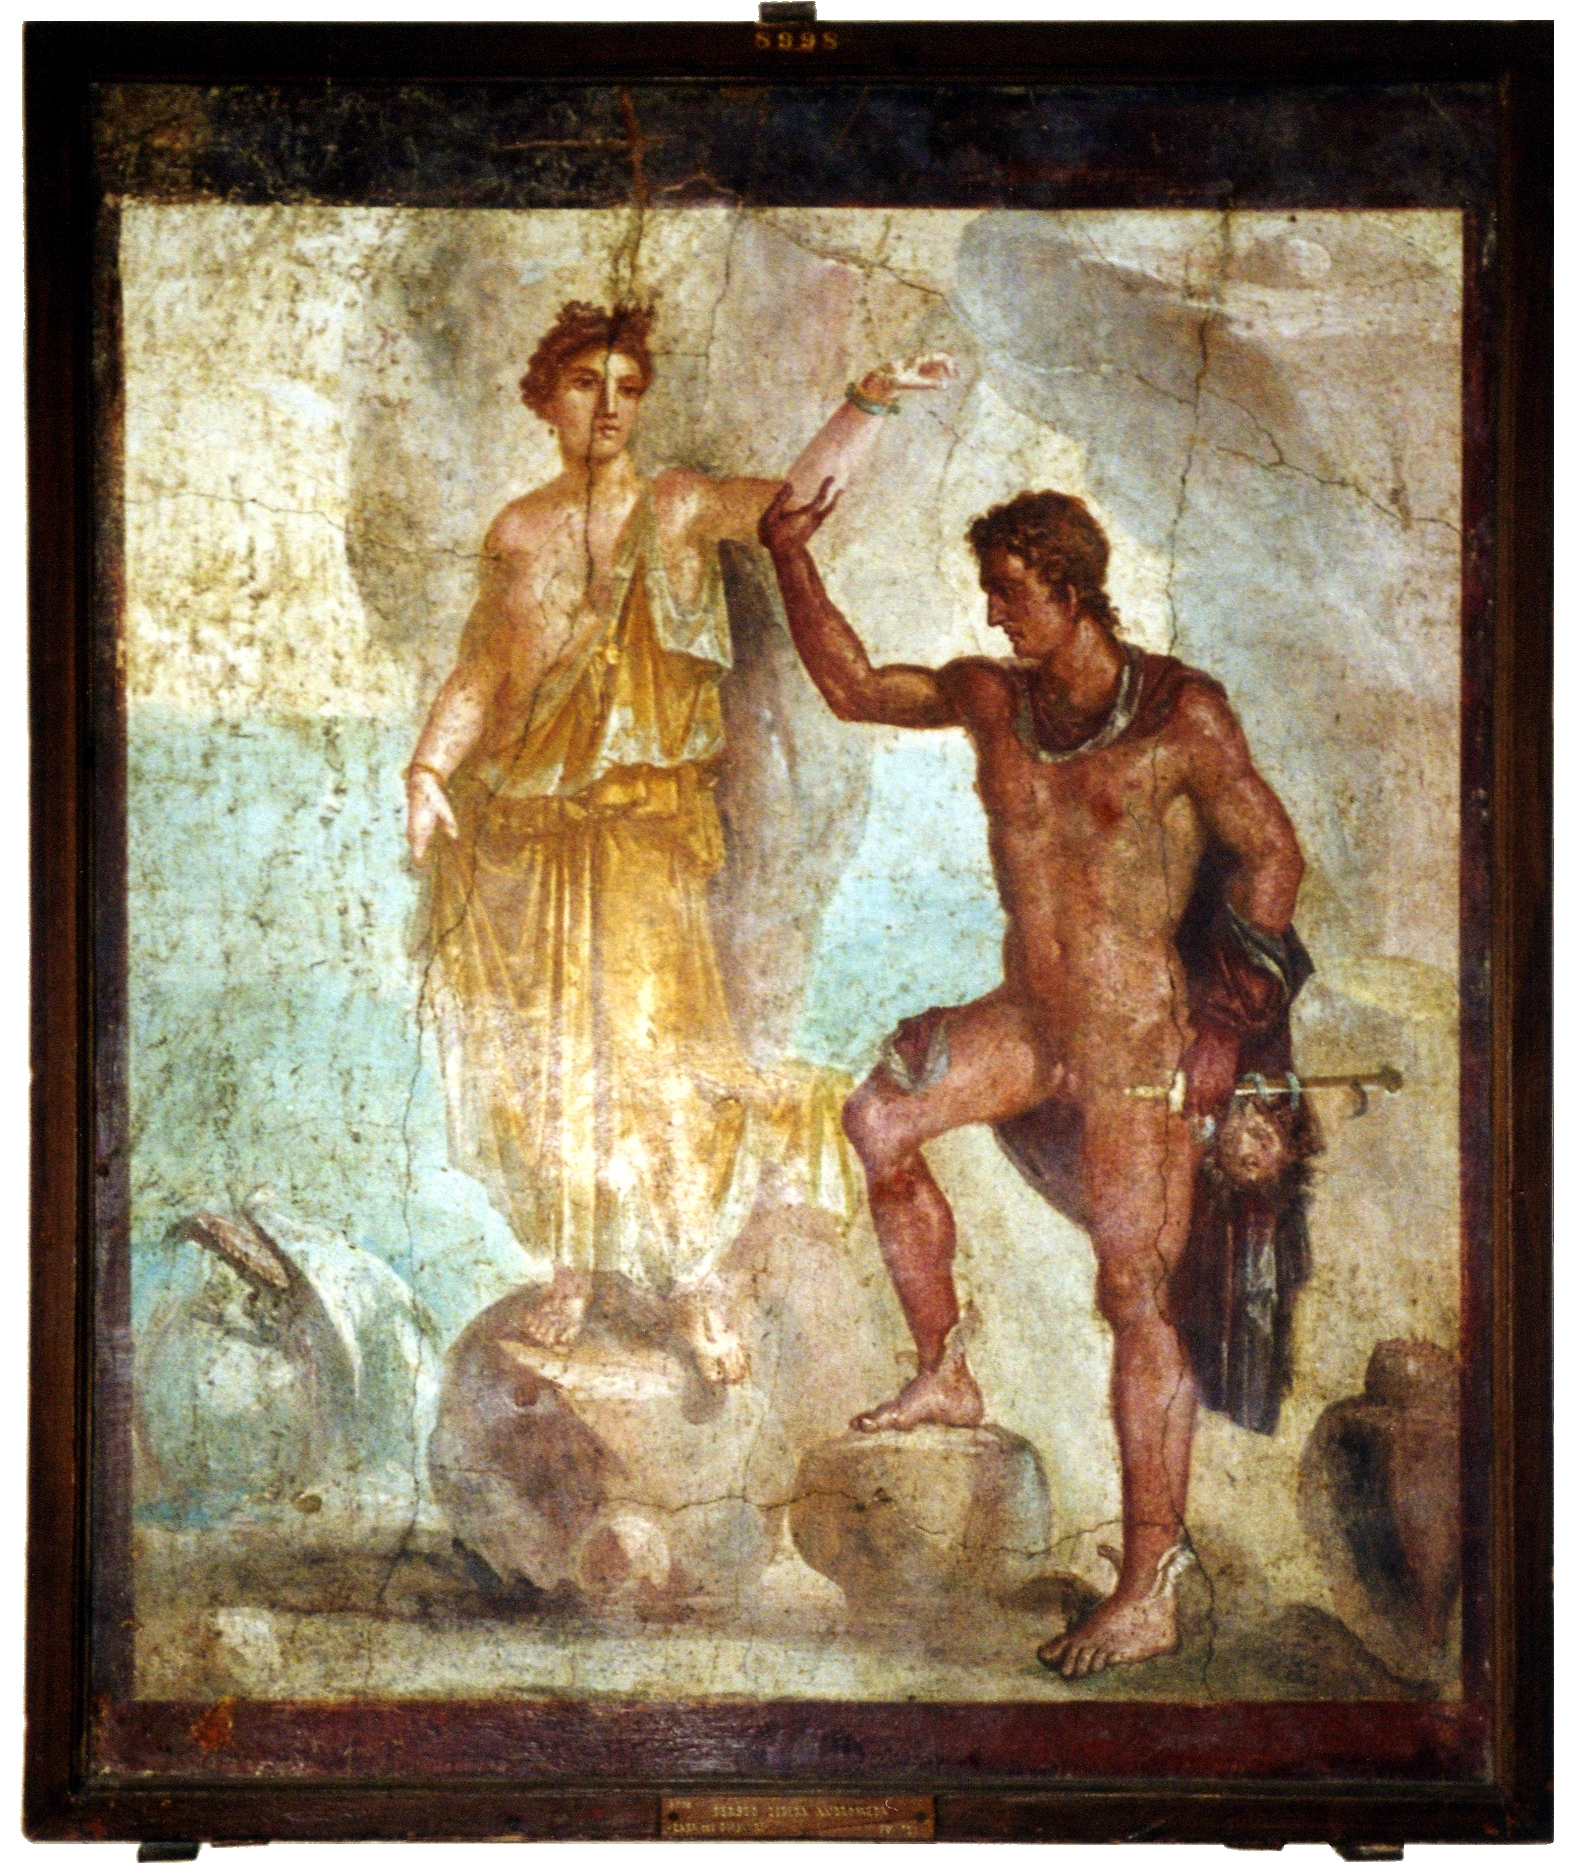 Wall painting from Pompeii found in the "...